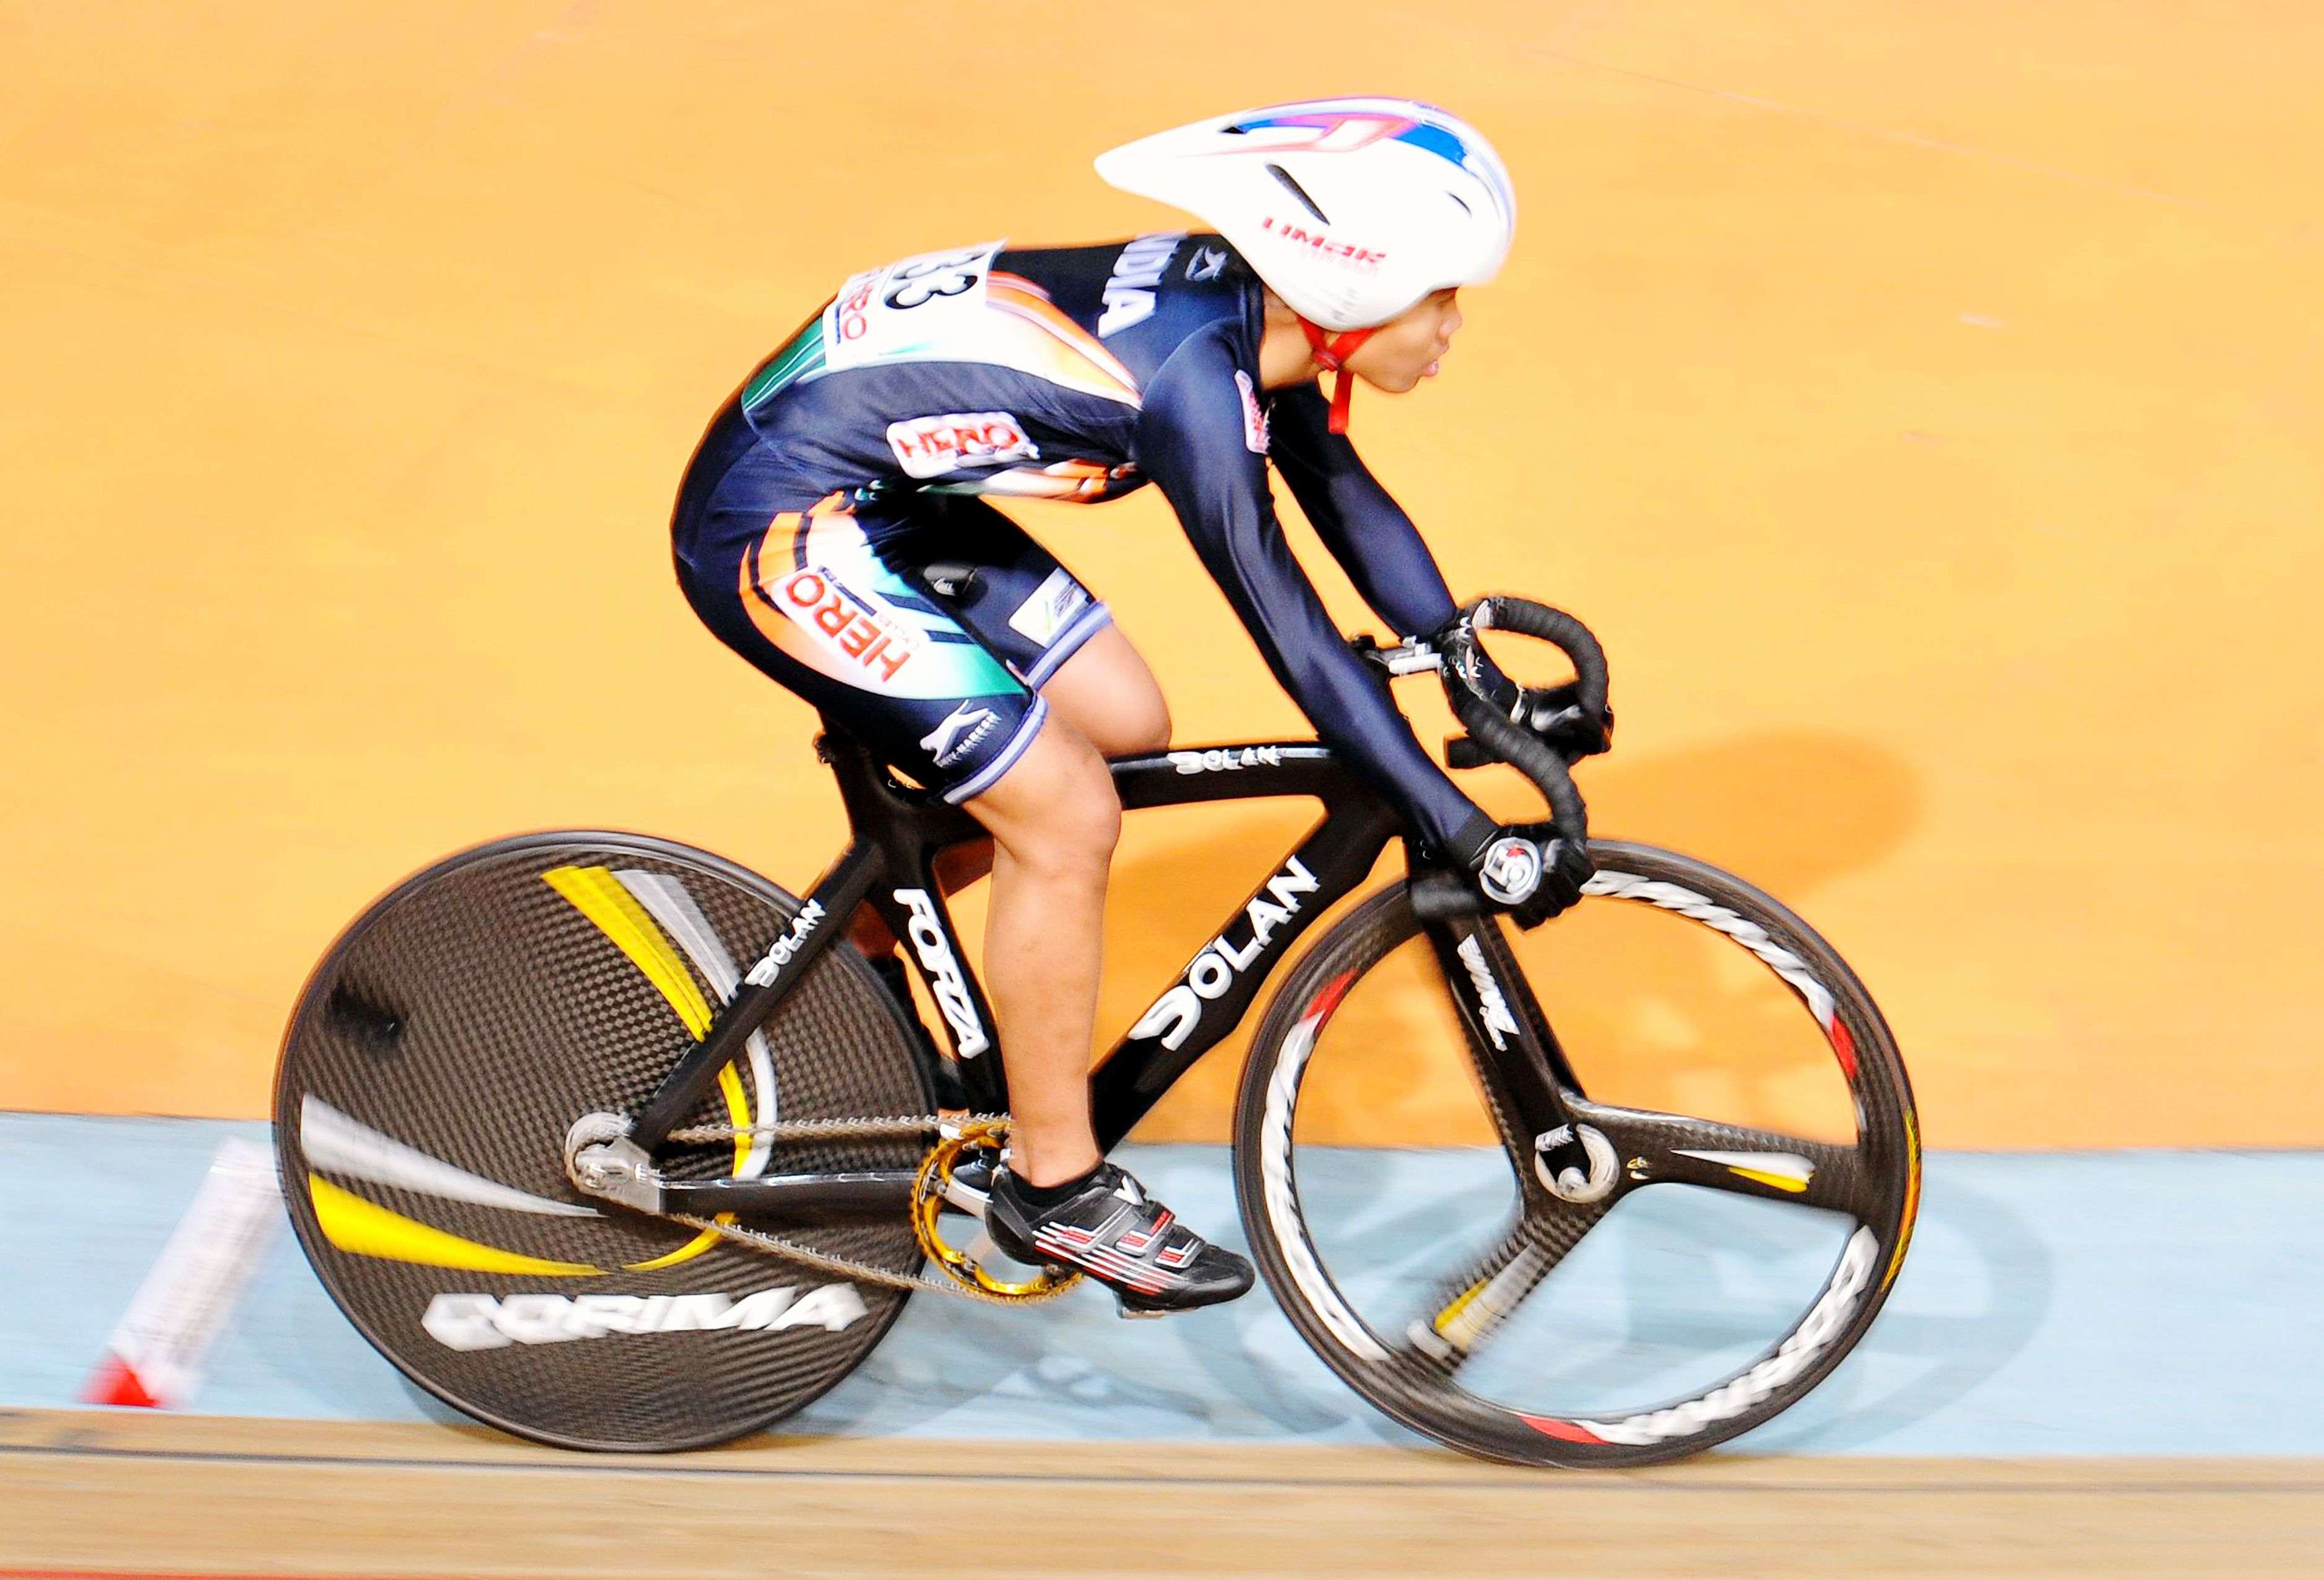 India's Deborah competes in the finals of women's juniors of 500m time trial-Women junior event during the Asian Cycling Championship in New Delhi on Thursday. PHOTO BY SANJEEV RASTOGI